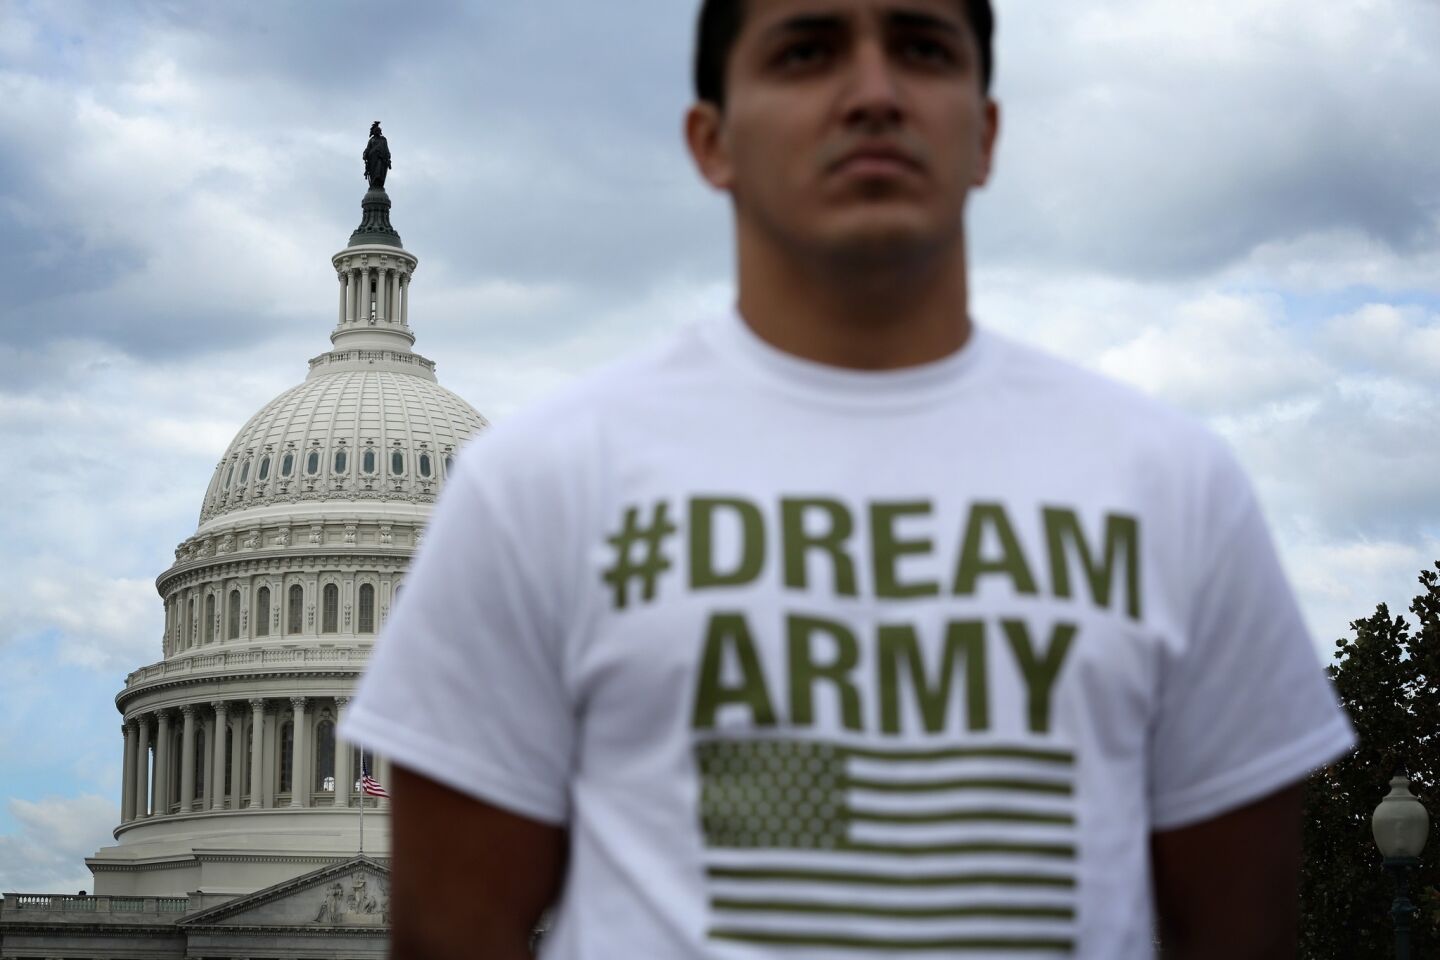 Lizardo Buleje of San Antonio stands in front of the U.S. Capitol during a rally calling for immigration reform.